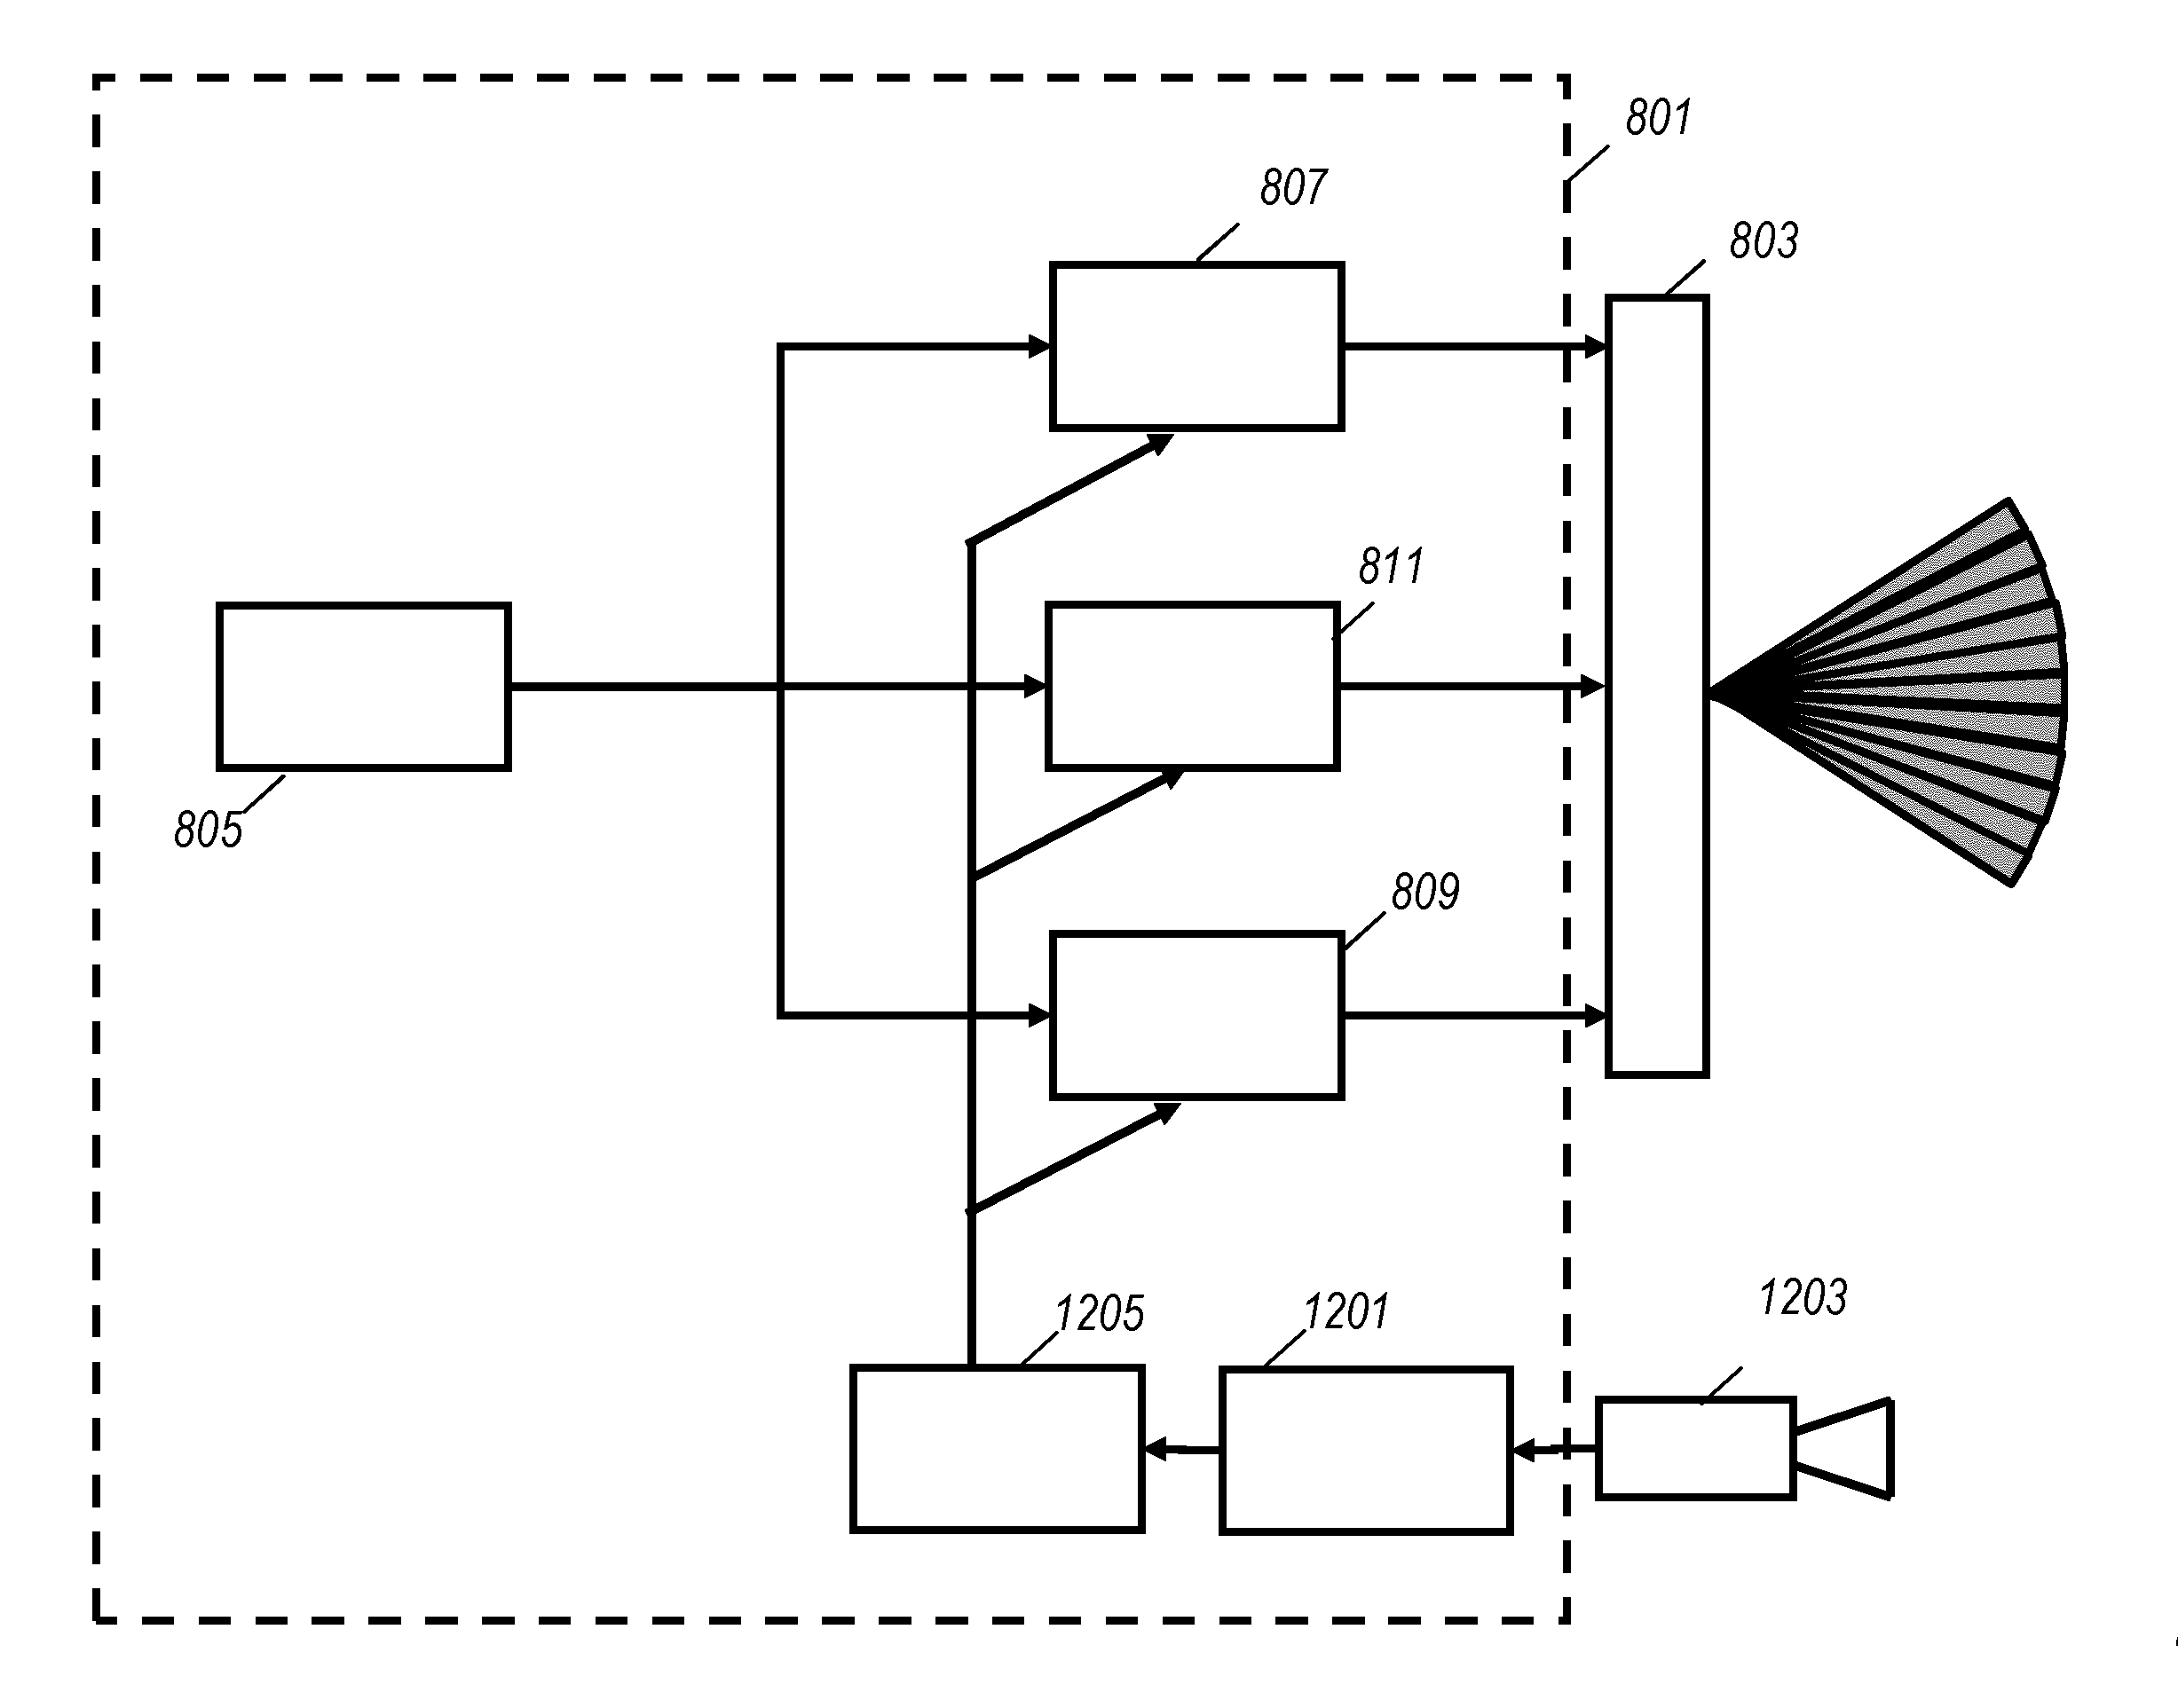 Generaton of images for an autostereoscopic multi-view display